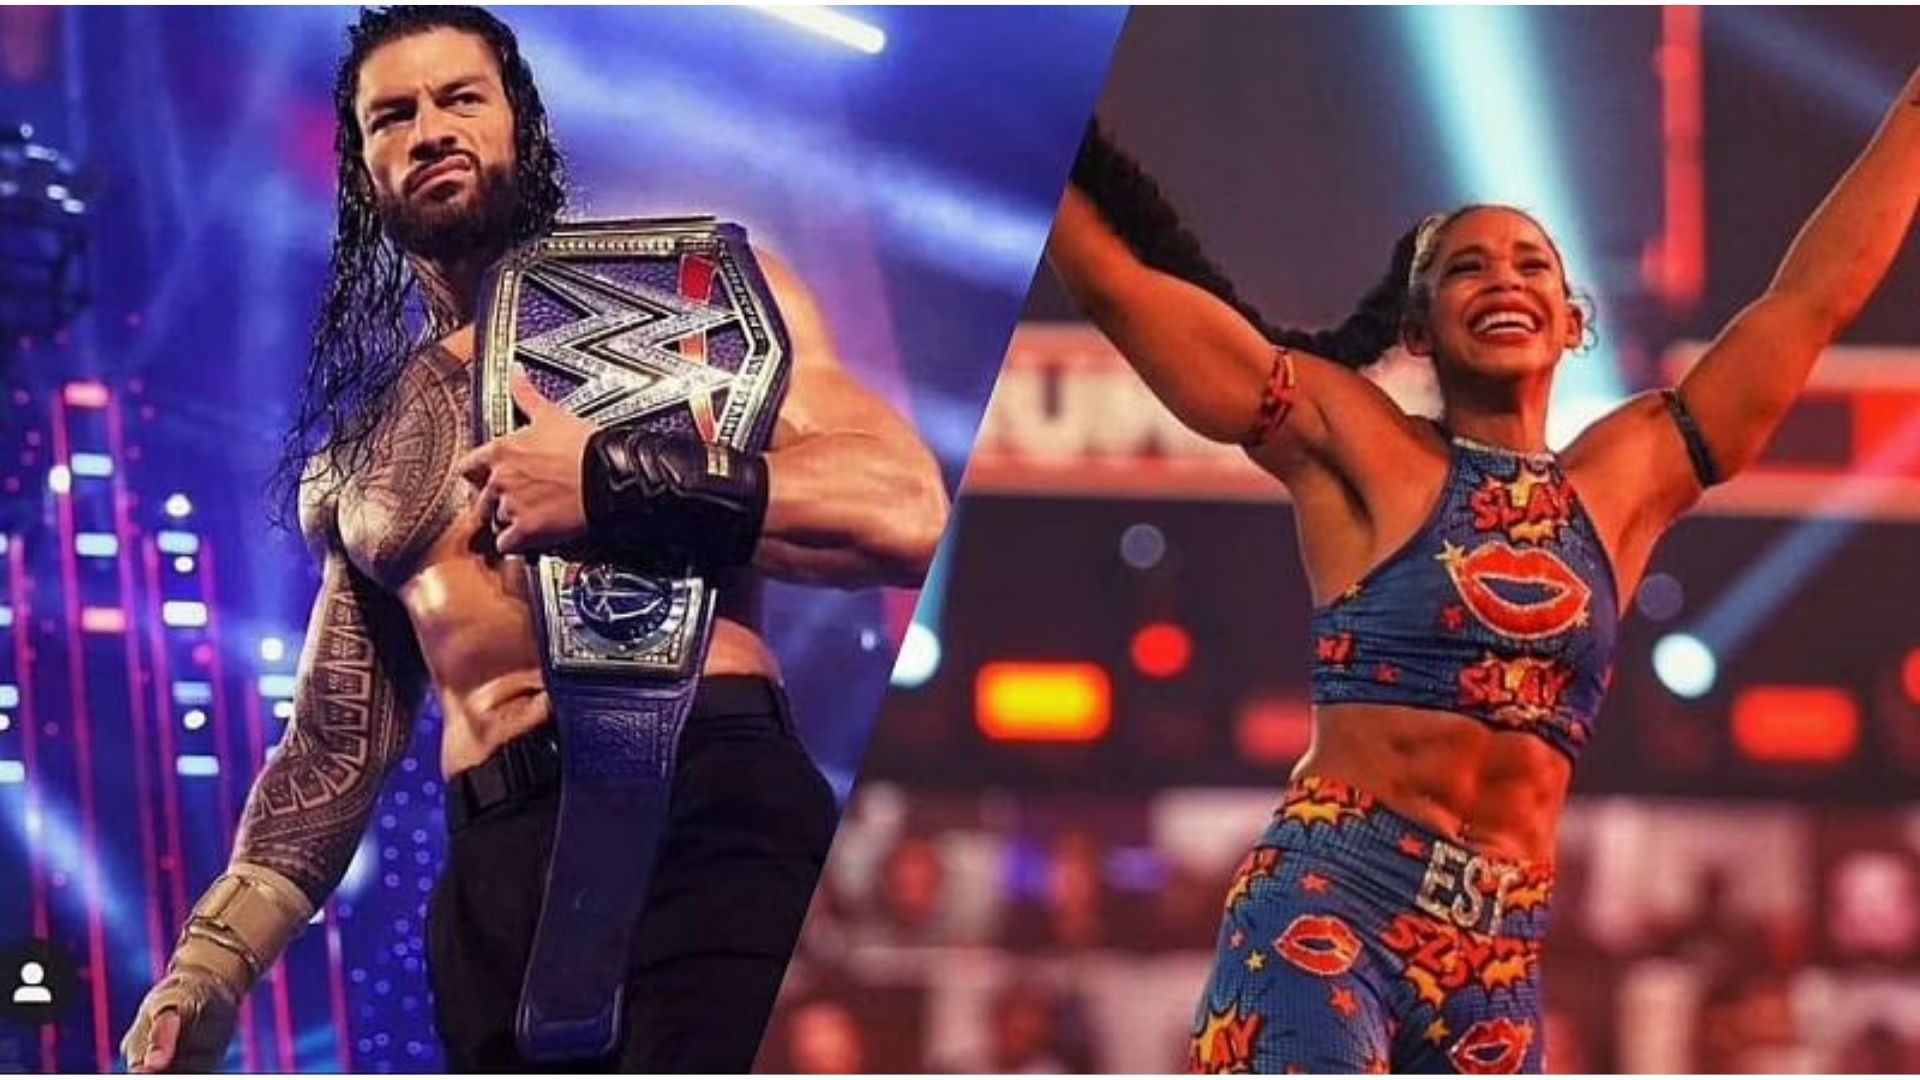 There are some dream intergender matches WWE can offer